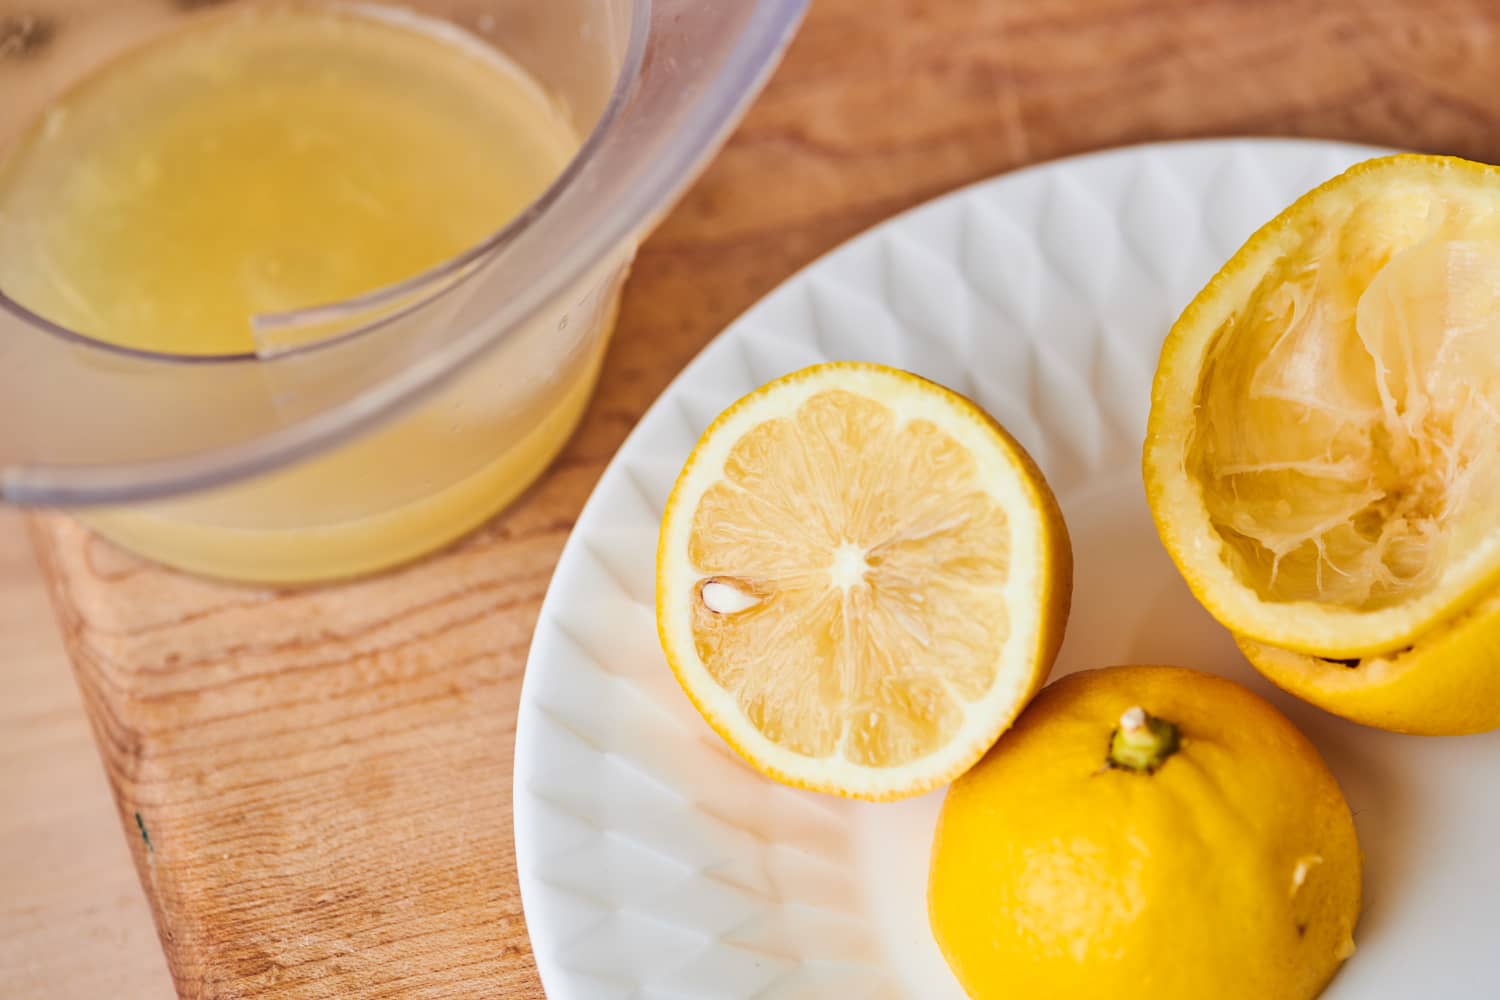 This Restaurant Trick for Juicing Lemons Is Shockingly Easy